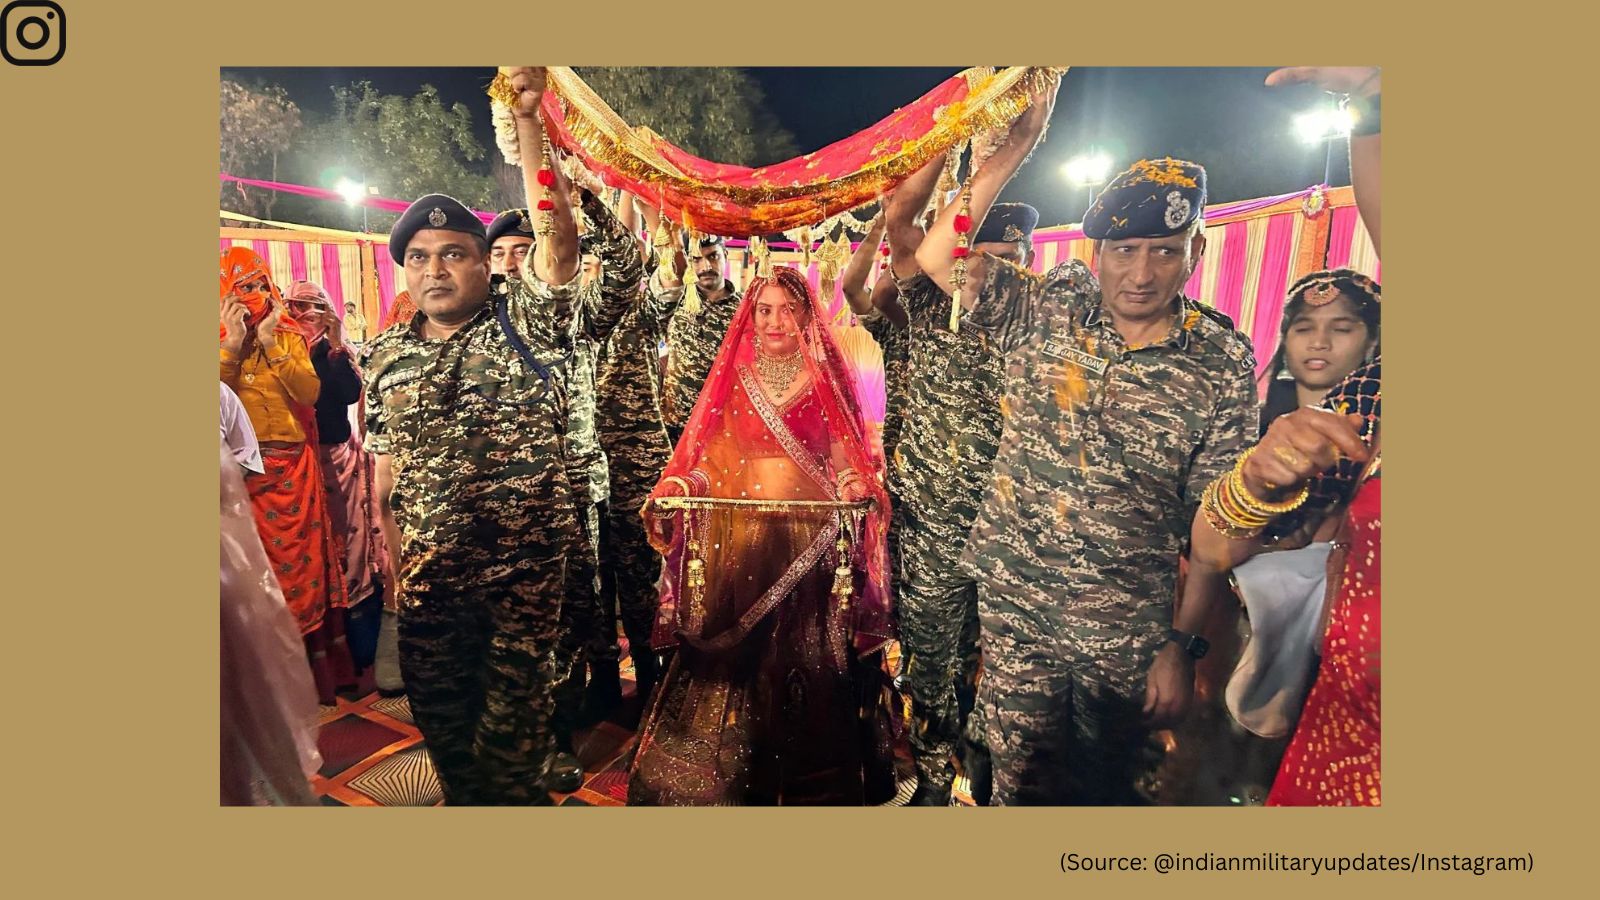 android, crpf jawans perform wedding rituals for slain soldier’s daughter in rajasthan, photo goes viral